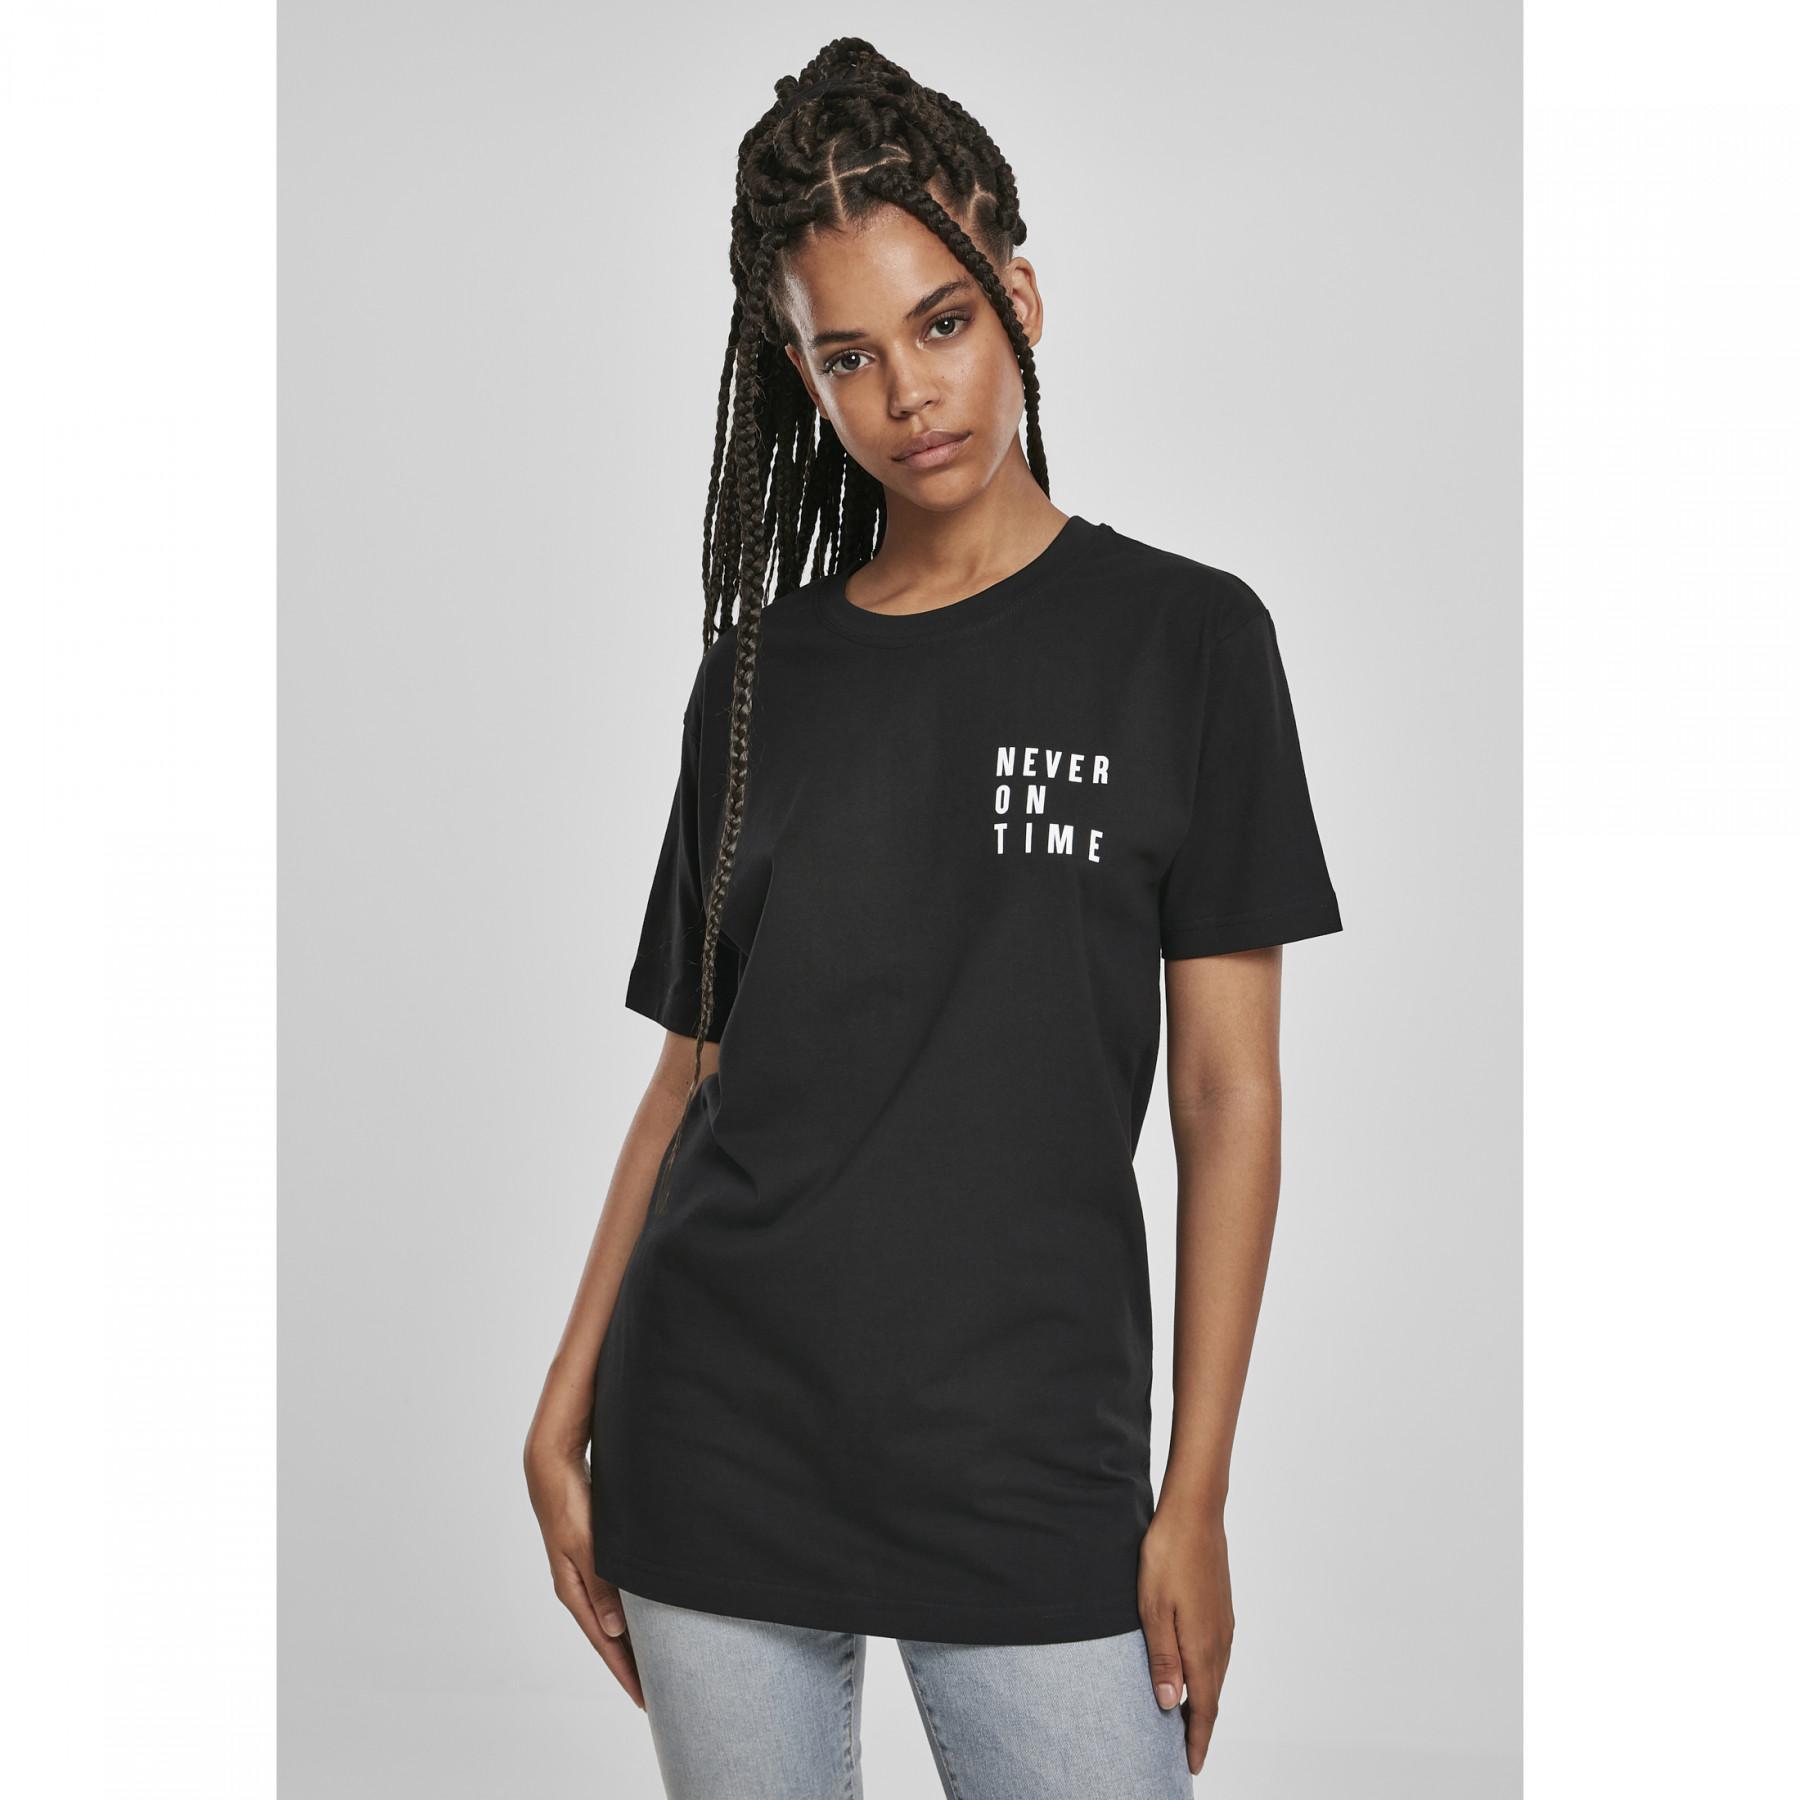 T-shirt donna Mister Tee never on time